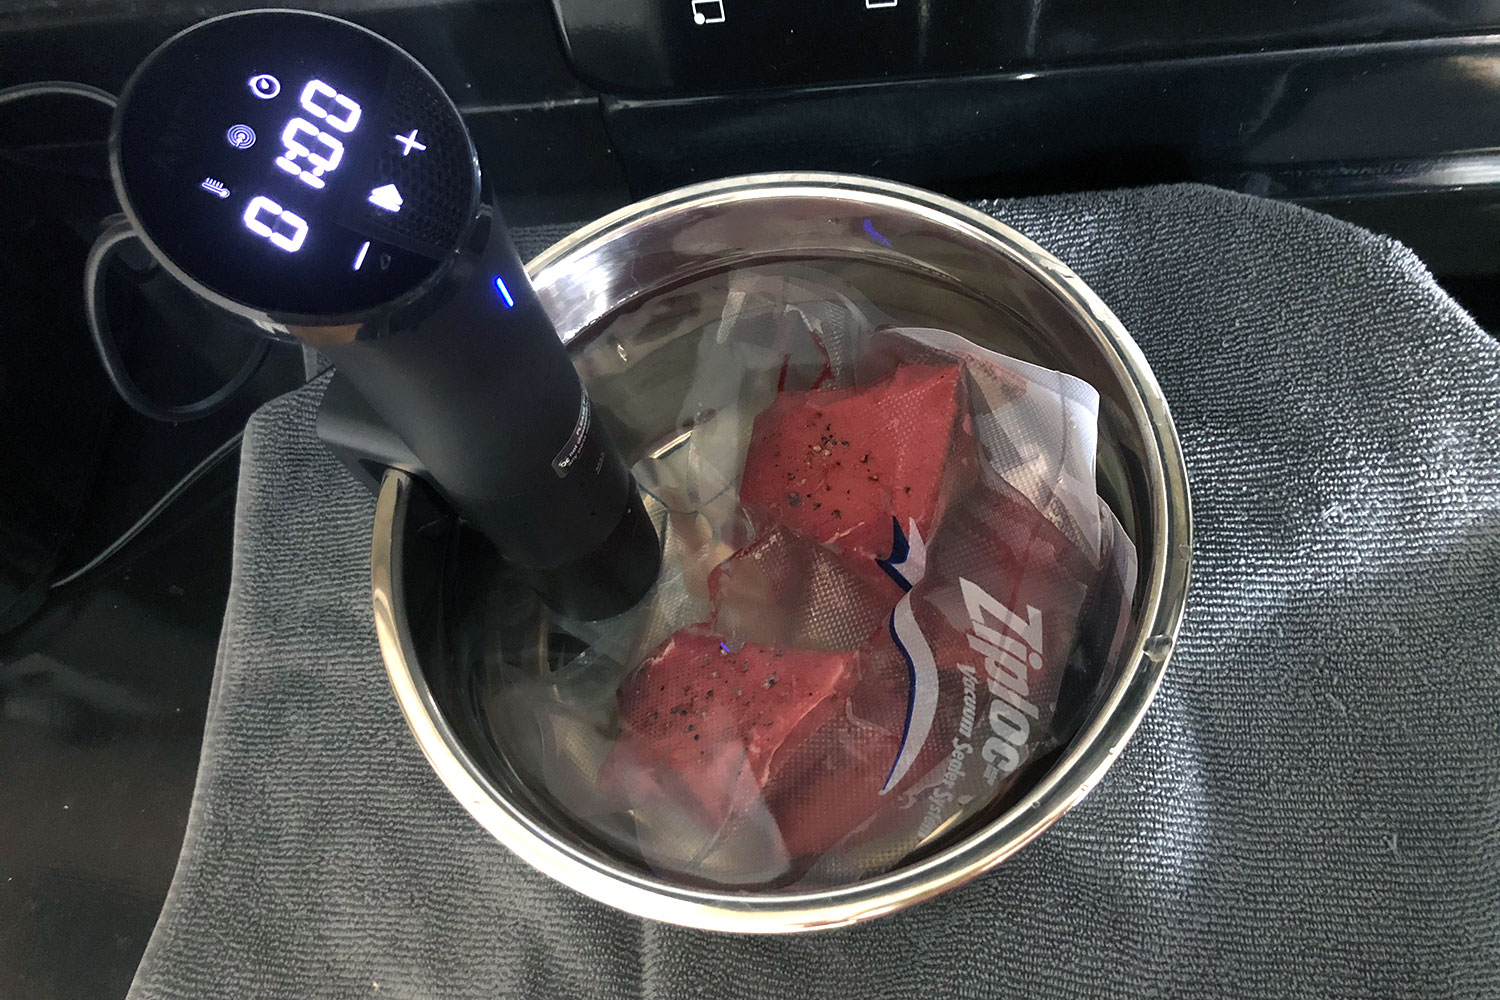 Greater Goods Precision Cooker Review